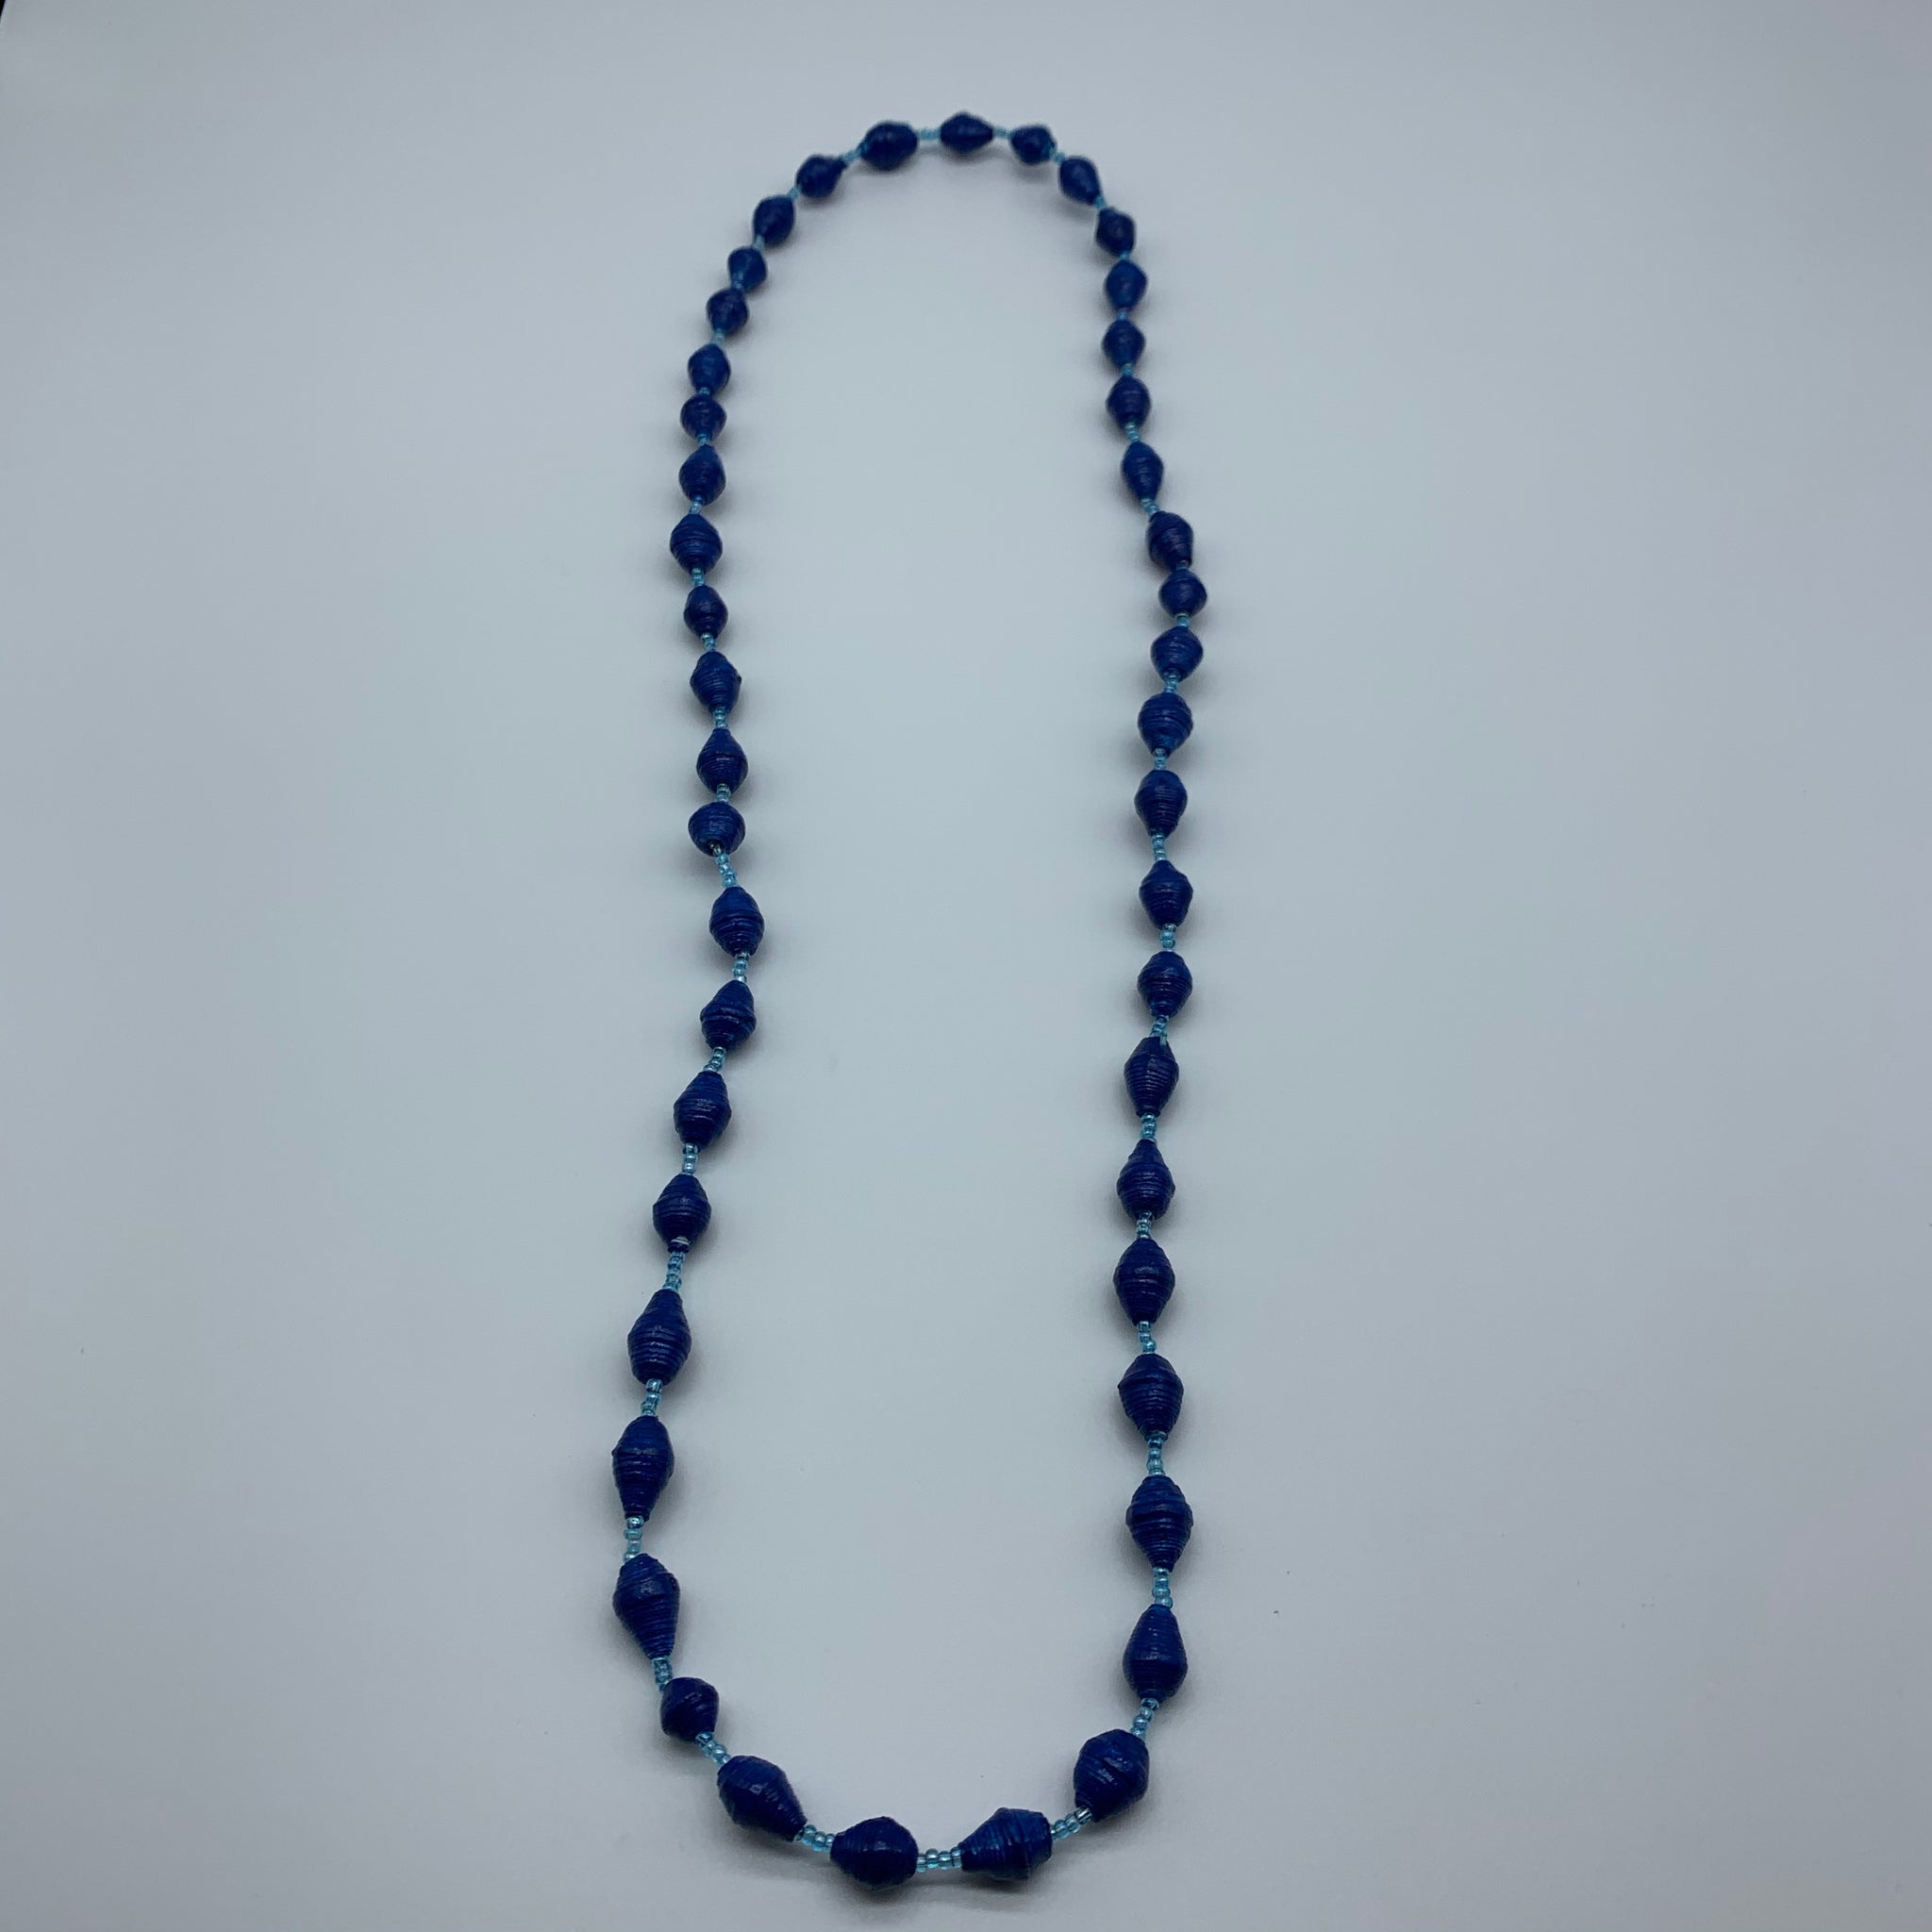 Paper Necklace with Beads-Blue Variation 5